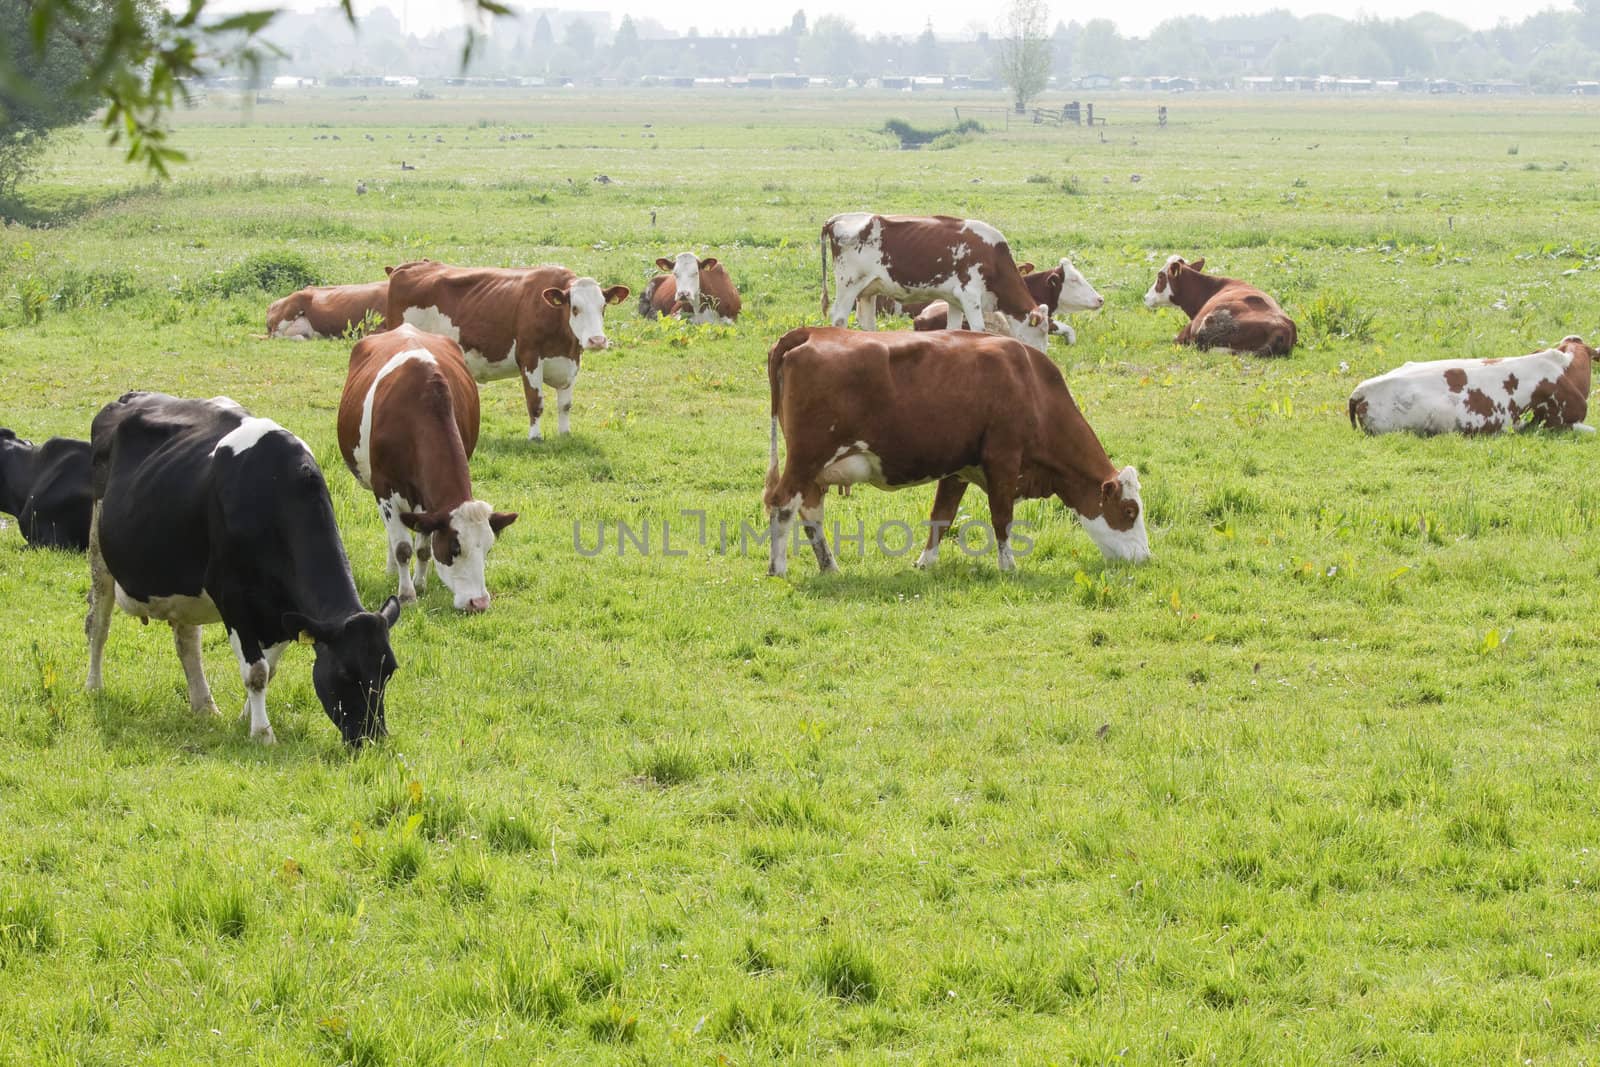 Grazing cows in Dutch country landscape on hazy day in spring